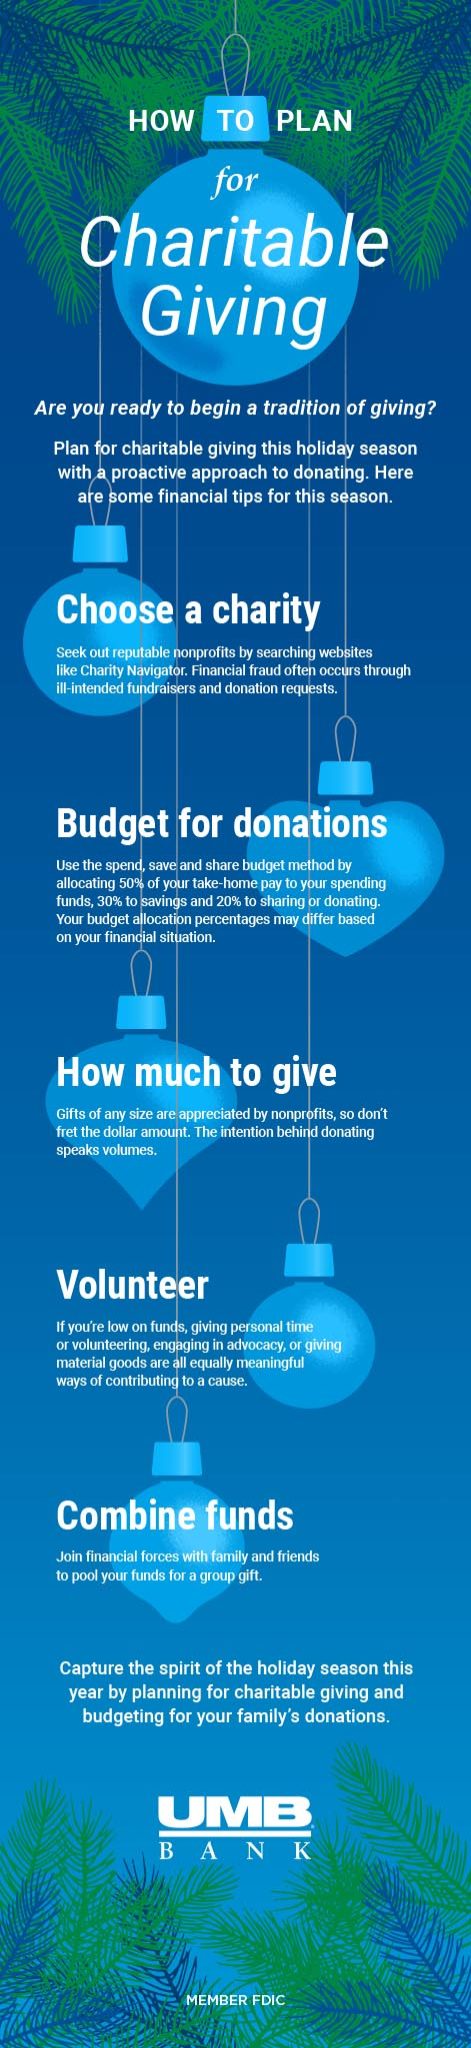 CONS Infographic HolidayGiving BLOG 471x2050 FINAL